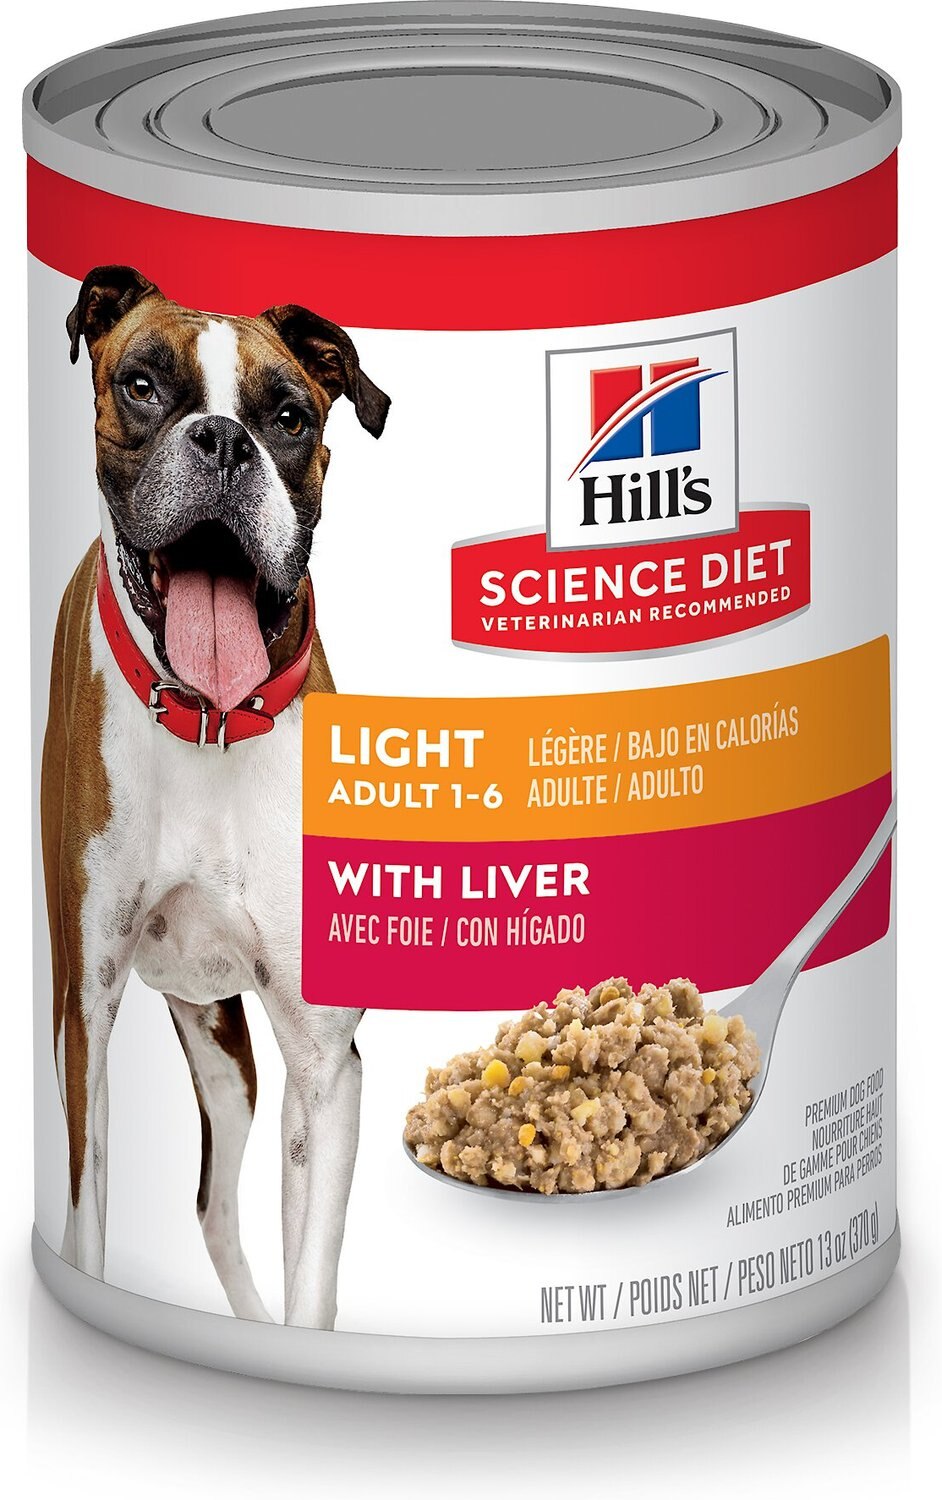 HILL'S SCIENCE DIET Adult Light with Liver Canned Dog Food, 13oz, case